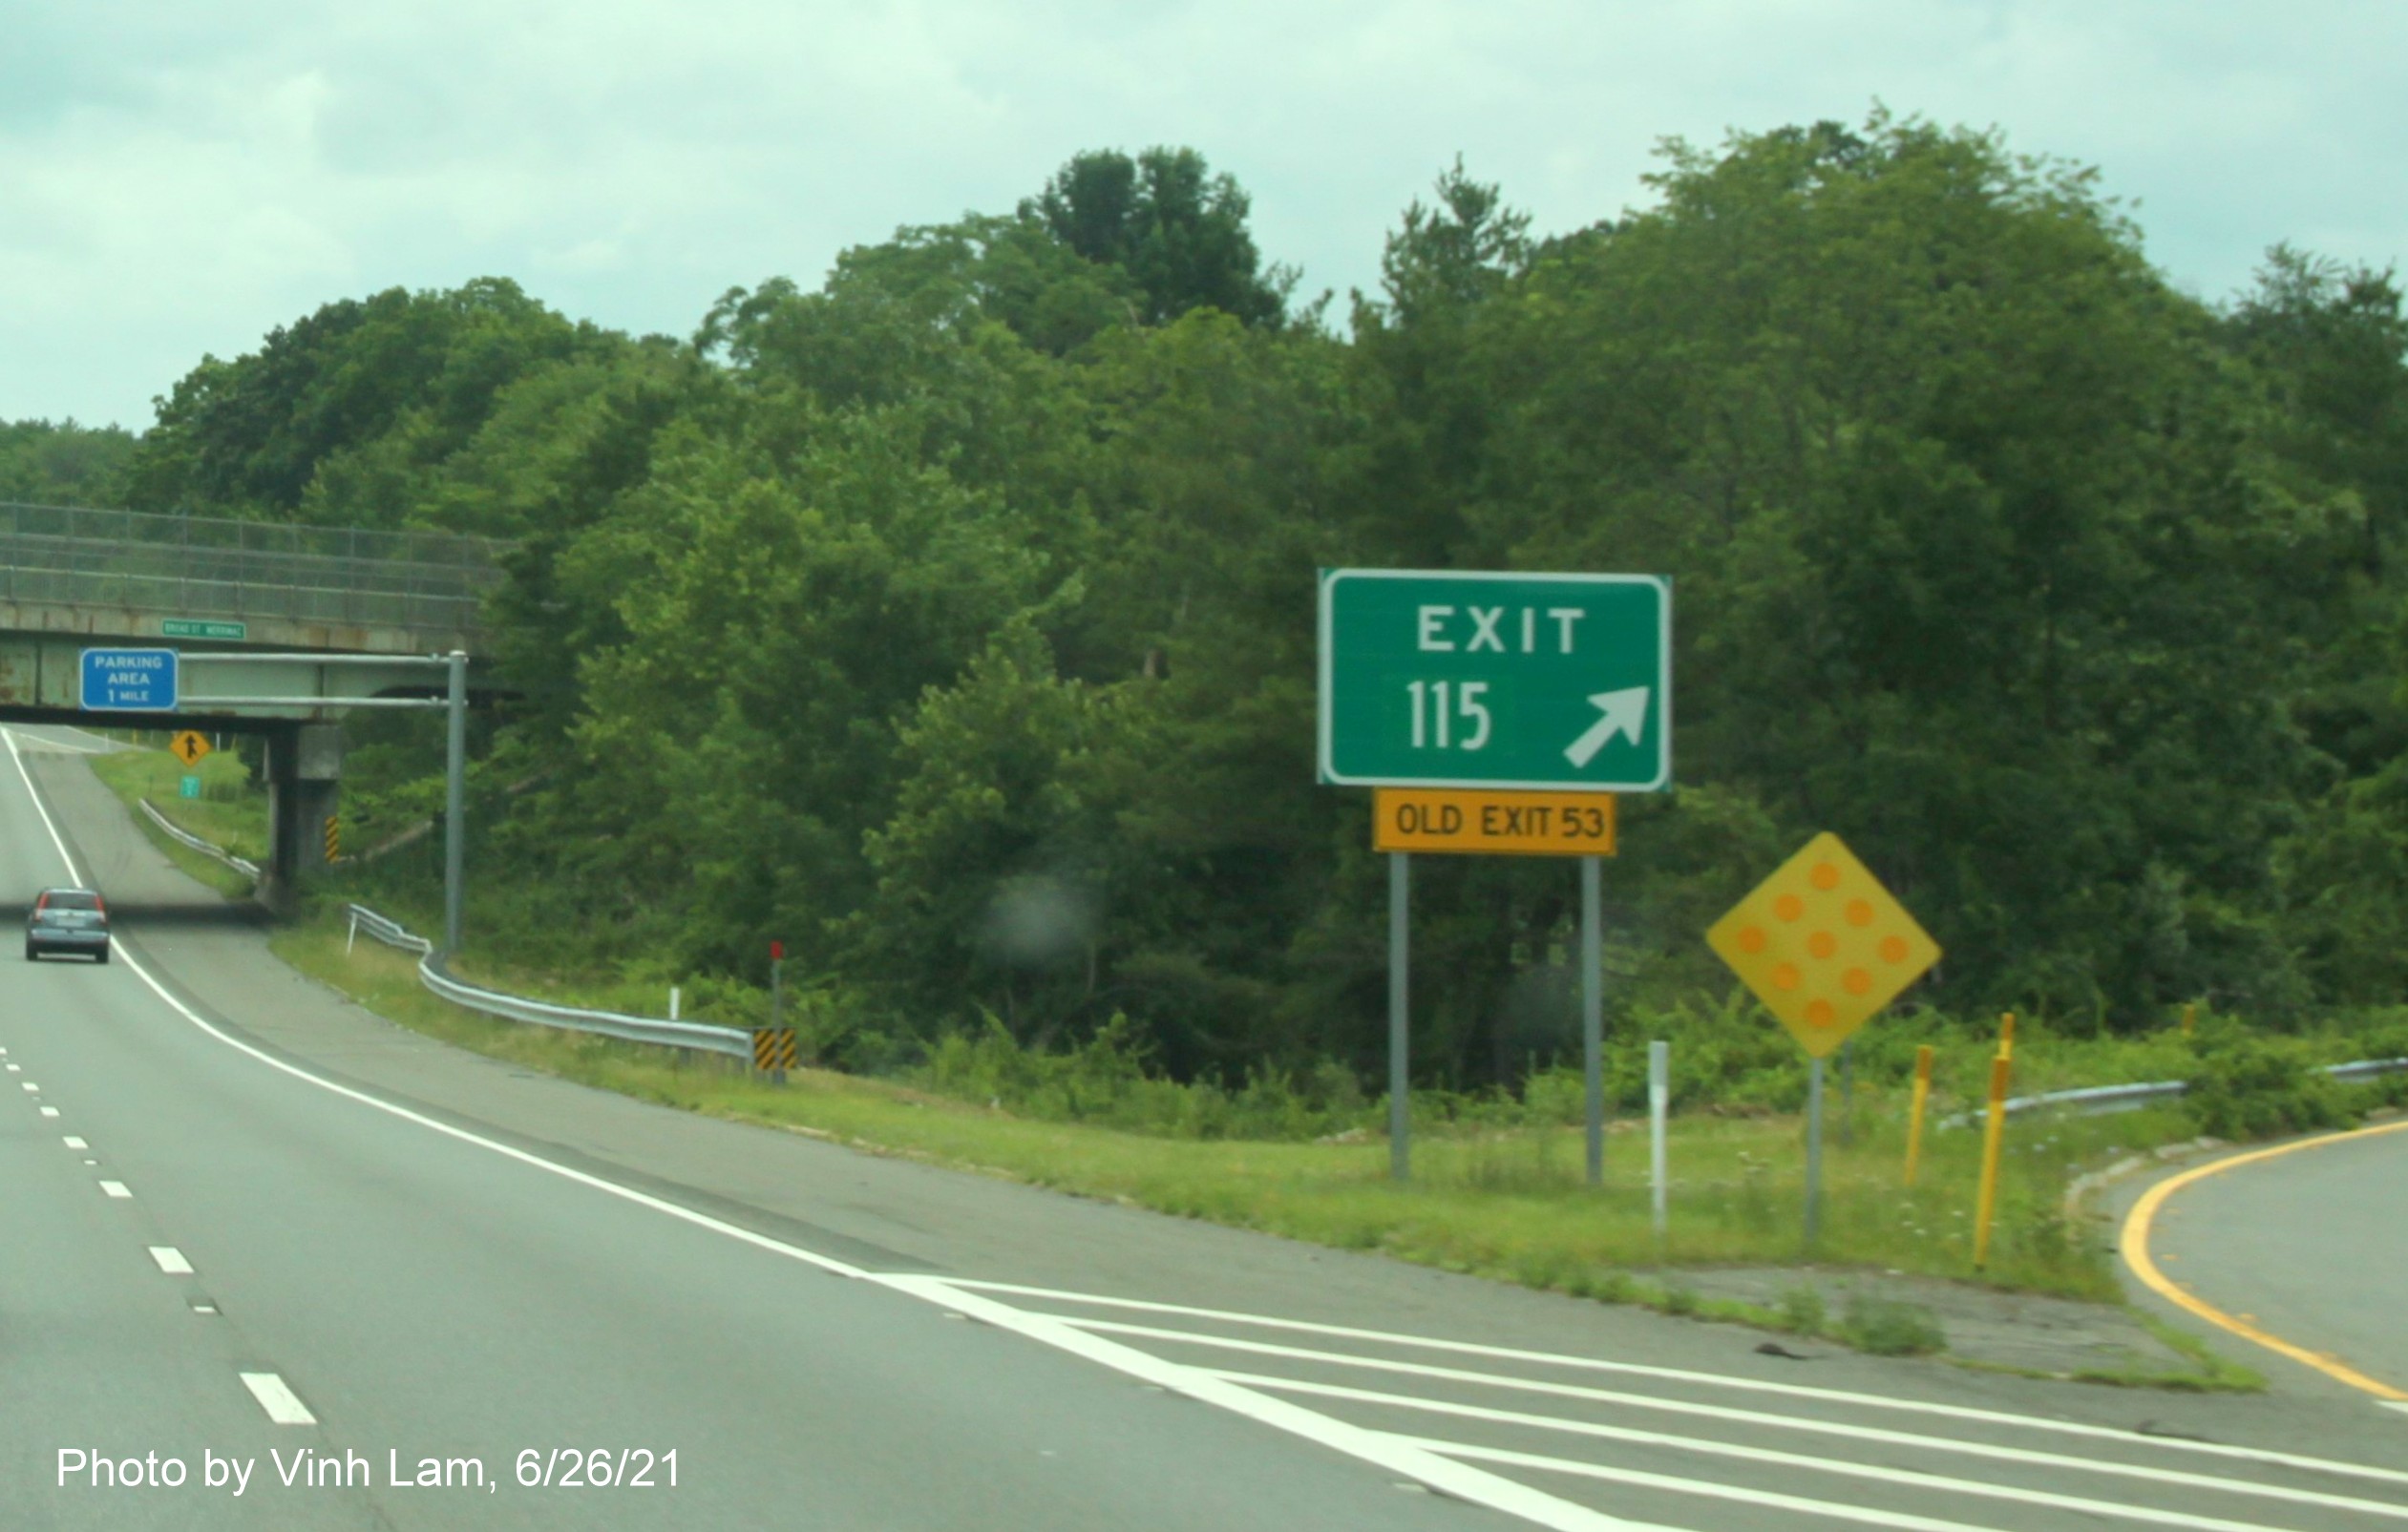 Image of gore sign for Broad Street exit with new milepost based exit number and yellow Old Exit 53 sign attached below on I-495 South in Amesbury, photo by Vinh Lam, June 2021